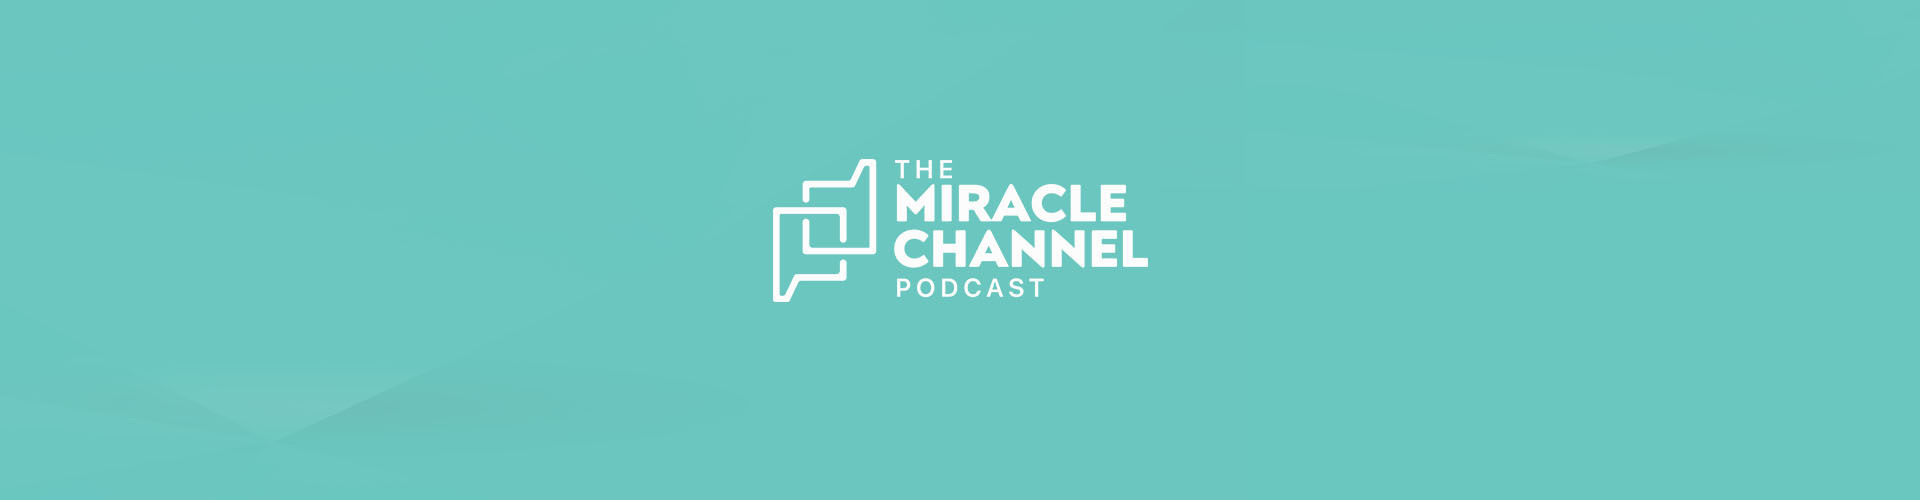 The Miracle Channel Podcast